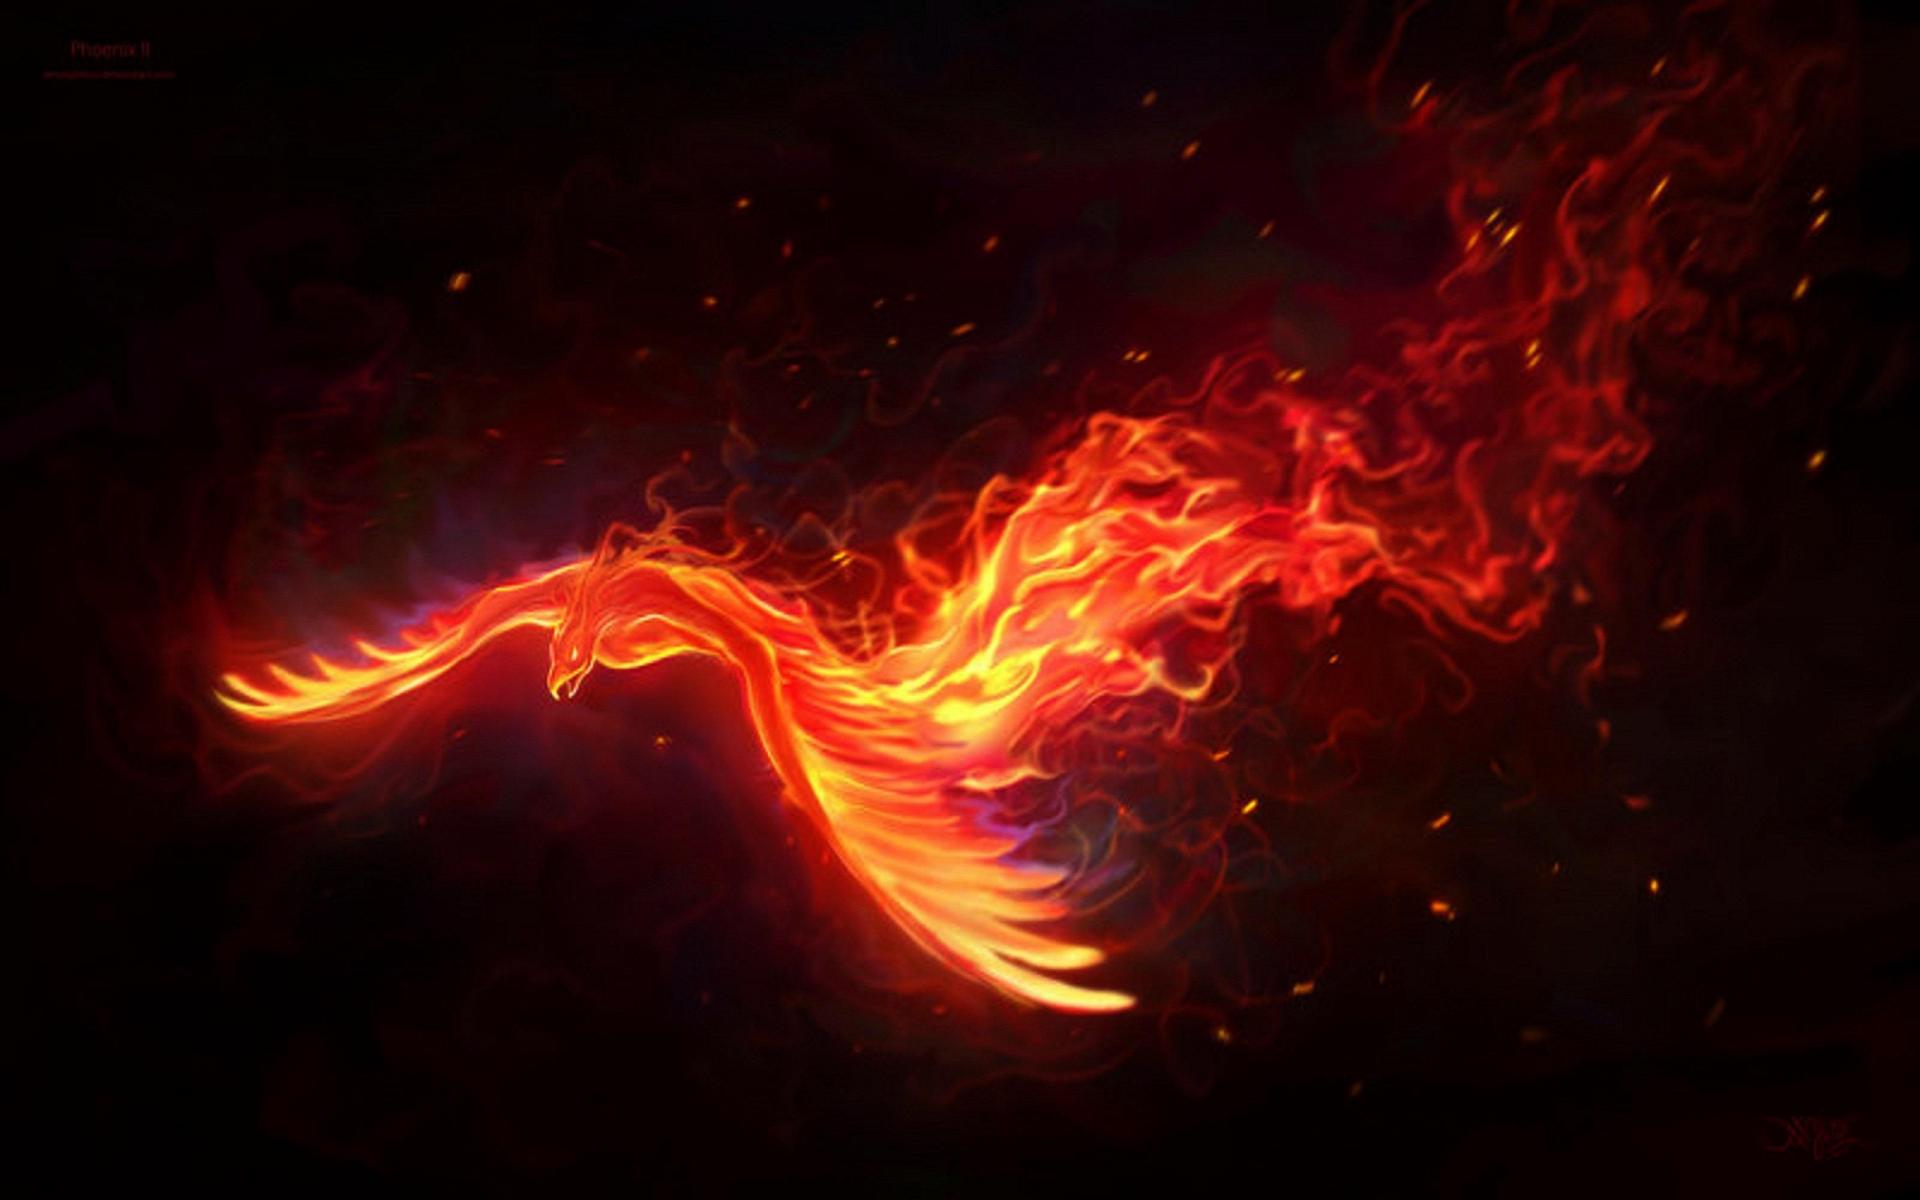 Fire phoenix   89329   High Quality and Resolution Wallpapers on